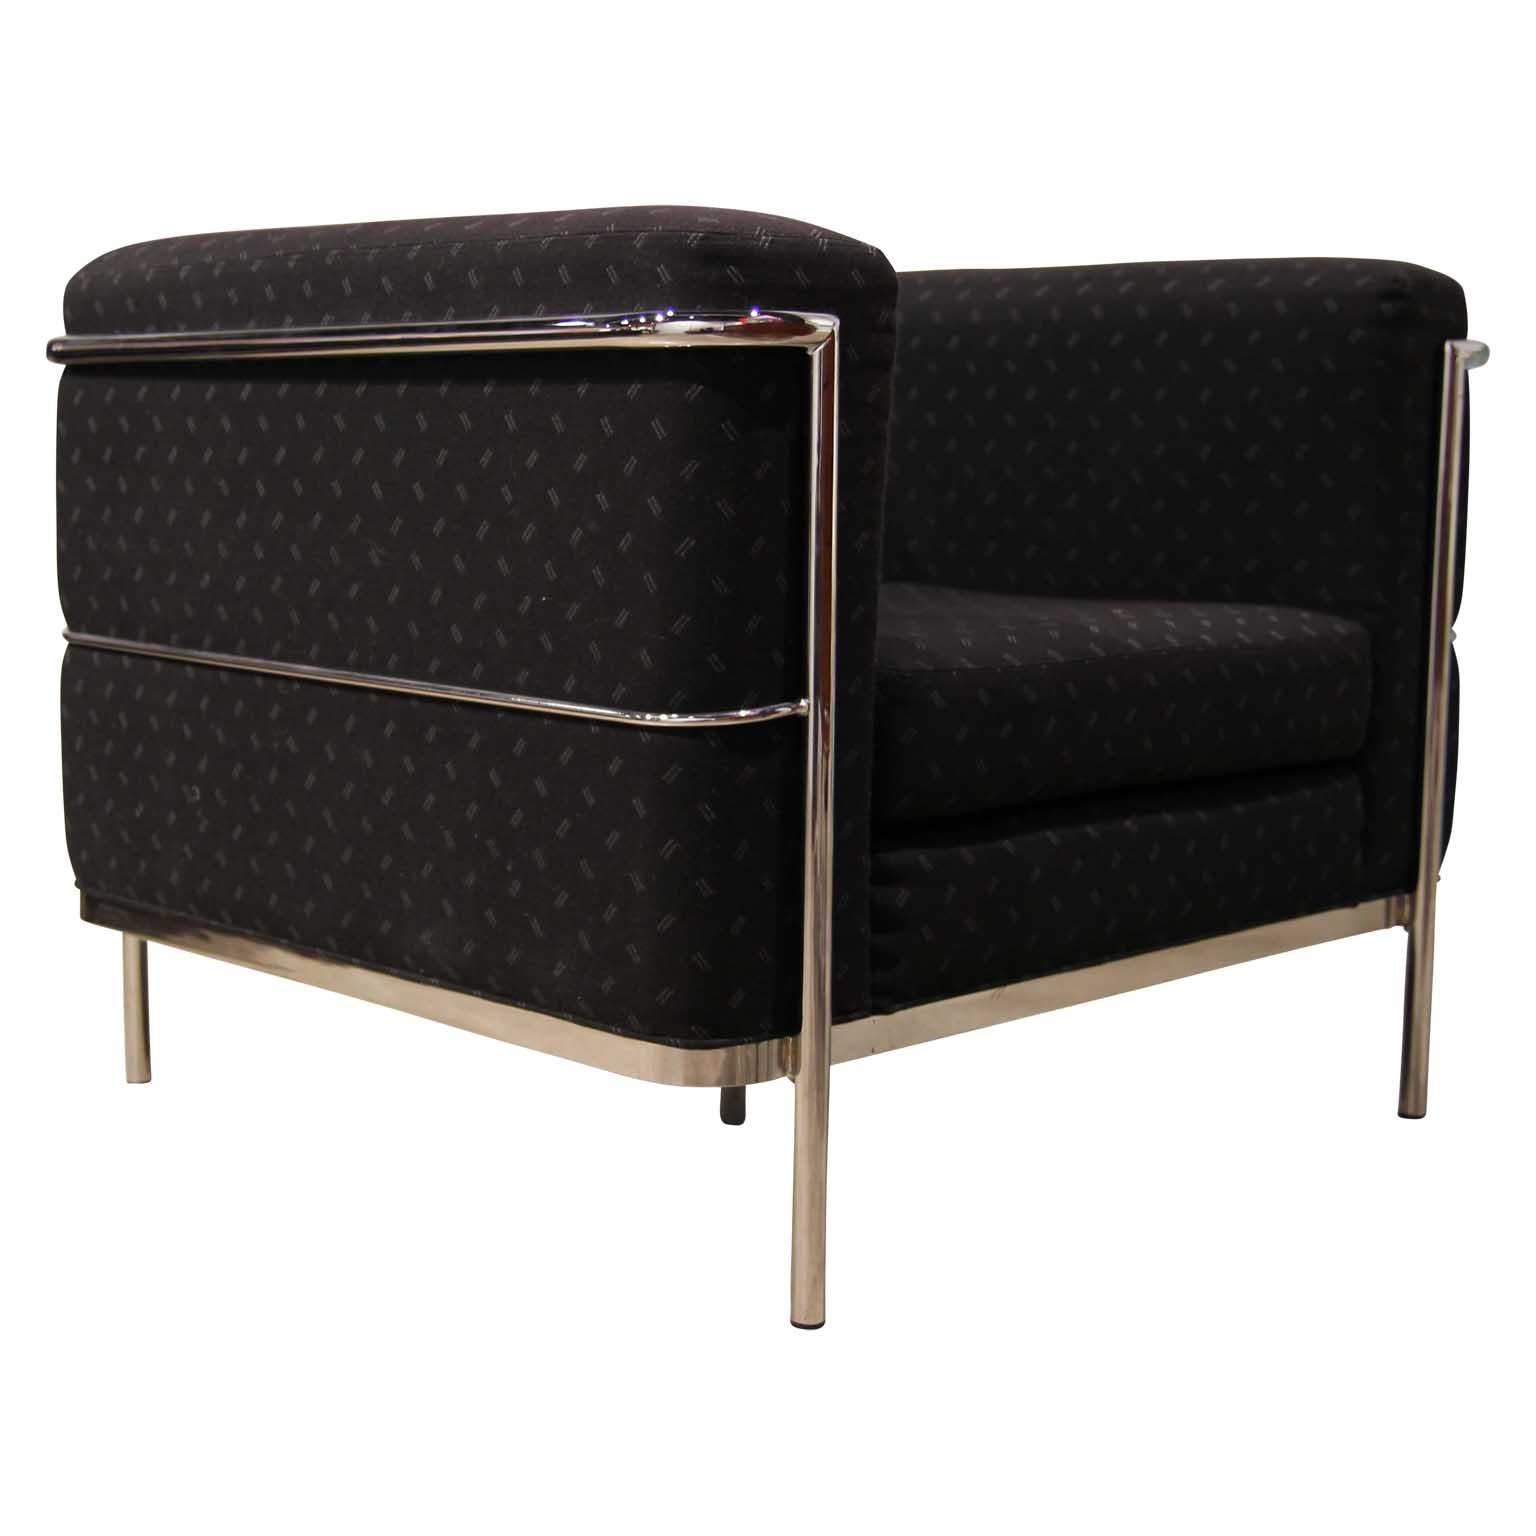 Unique LC3 Le Corbusier style armchair with black upholstered cushions and chrome framing. Designed after the LC3 